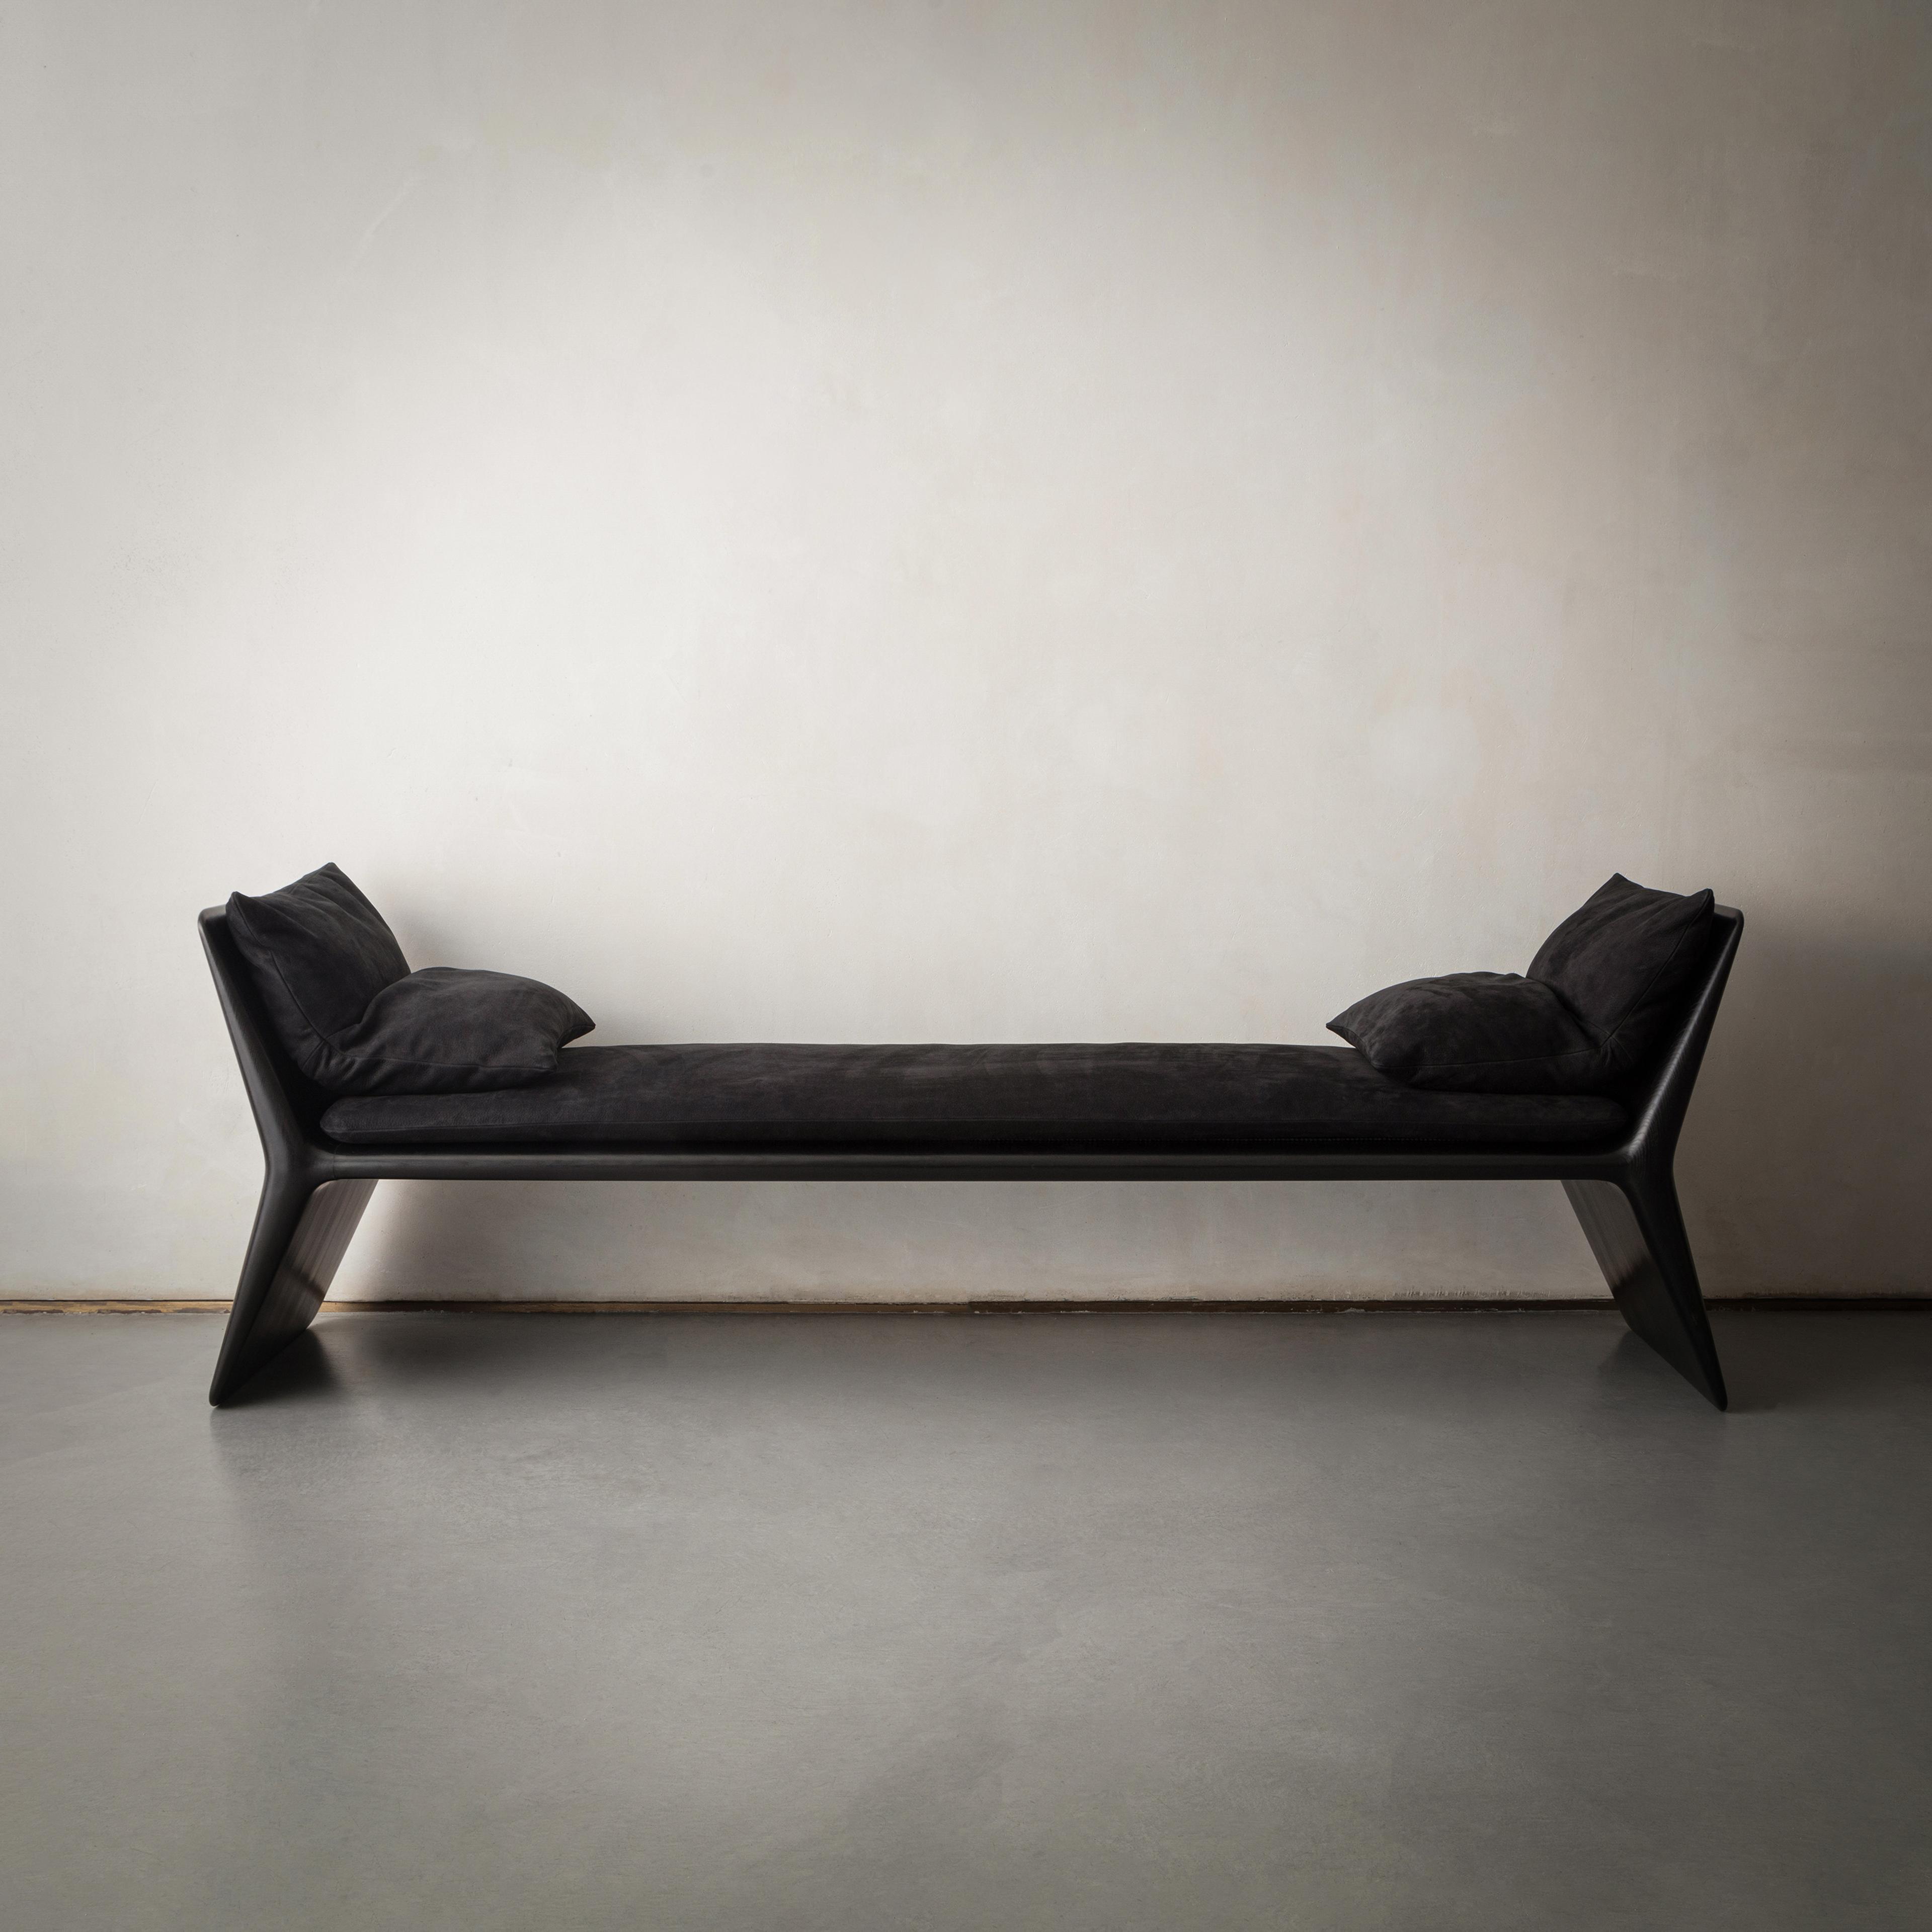 Pieter Maes Ateliers Courbet Palindrome Bench Rutger Graas Bench Daybed